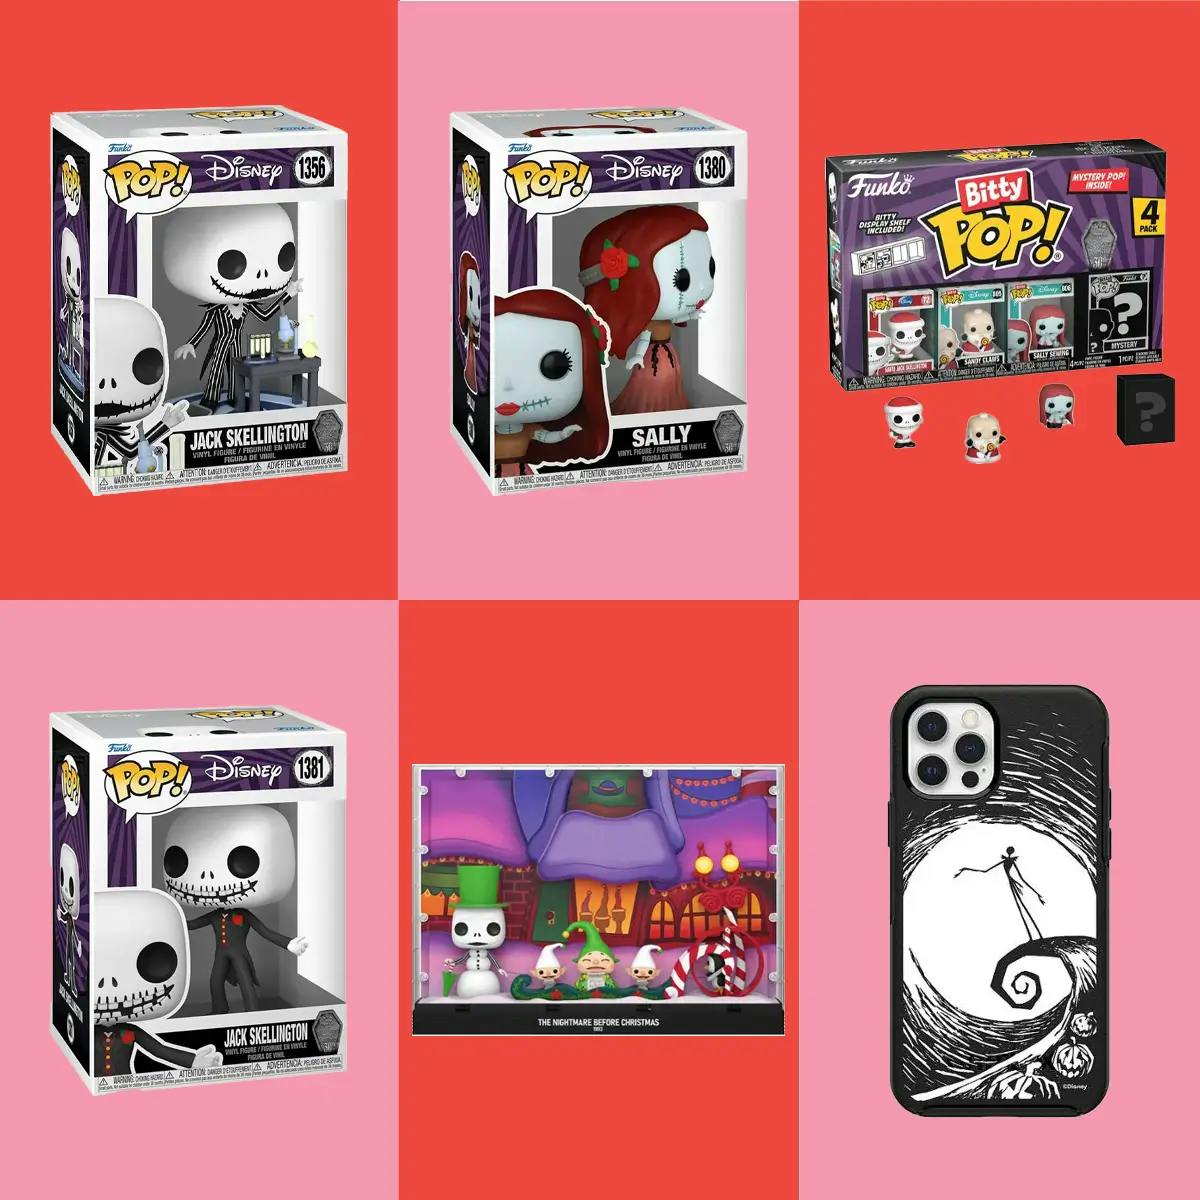 Montage of Nightmare Before Christmas products including characters from the film: Jack Skellington, Sally, Bitty Pop collection, the Nightmare Before Christmas carolers and the Nightmare Before Christmas iPhone Case.